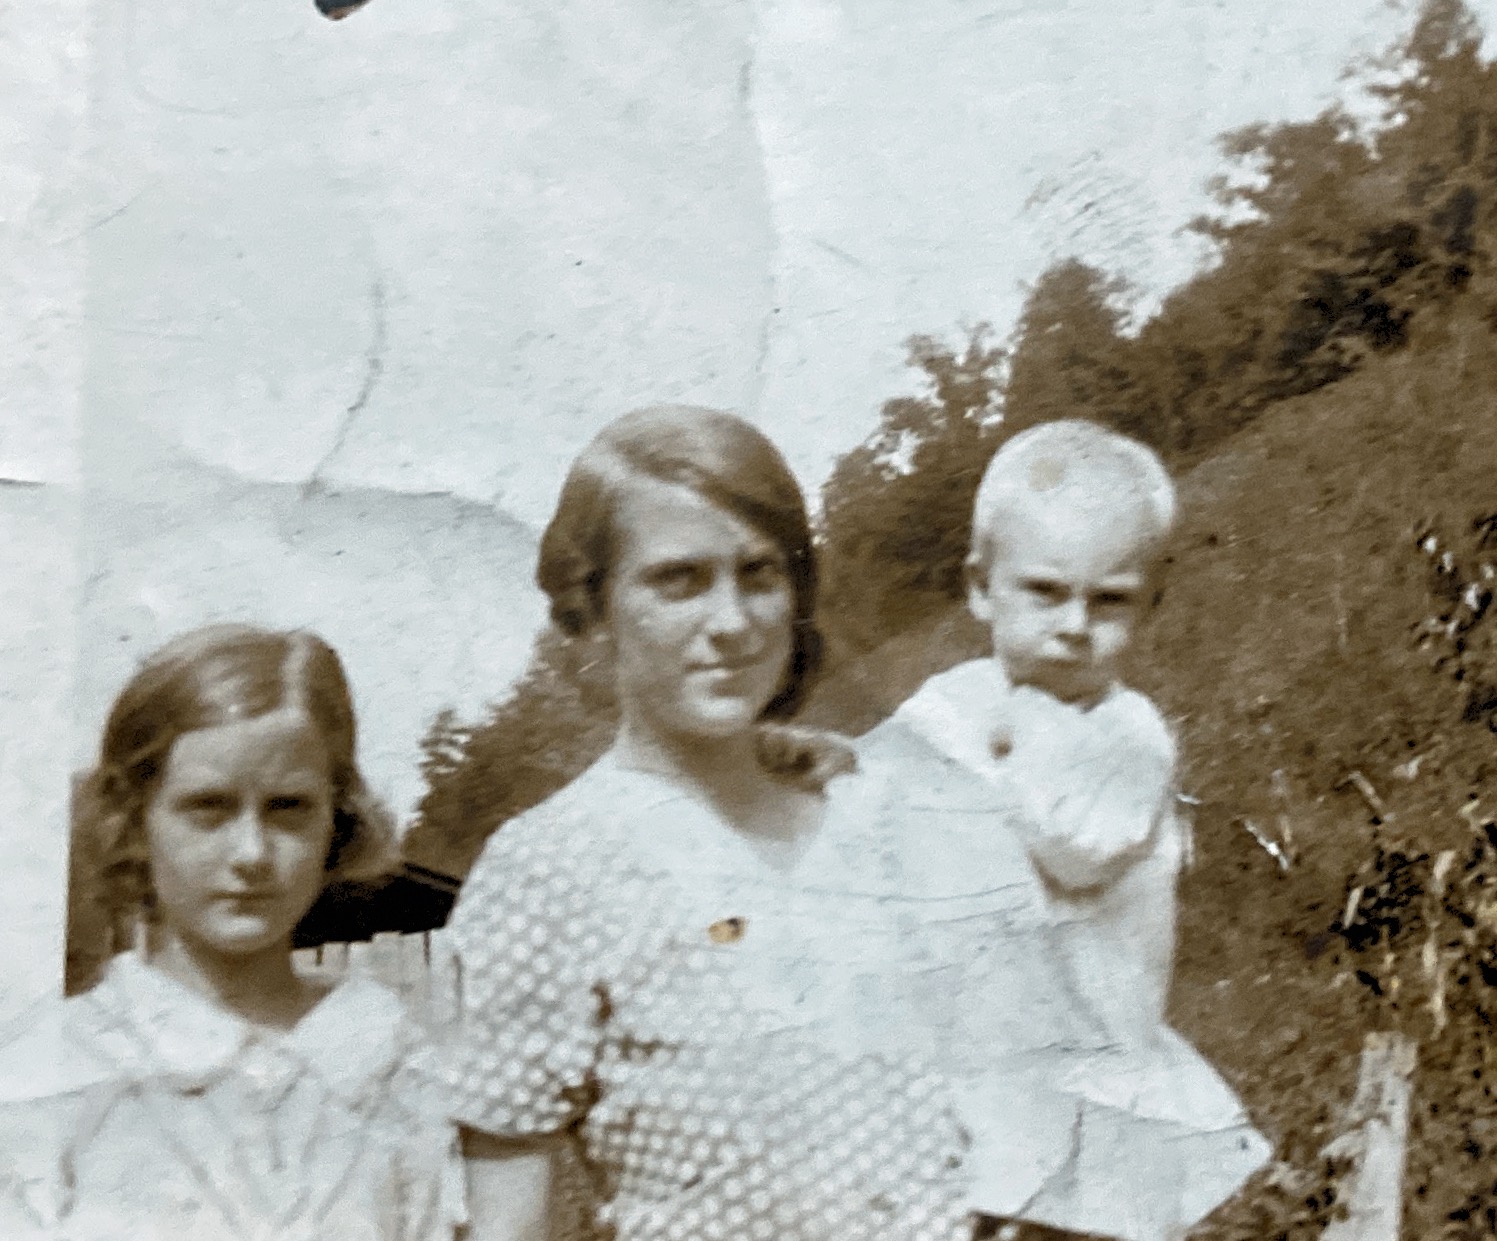 My Dad Charles Grover Milwee his mom my grandmother Vera Crider Milwee with her sister Edith Crider August 28th 1933 my Dad was 14 months in Hagan, Virginia.